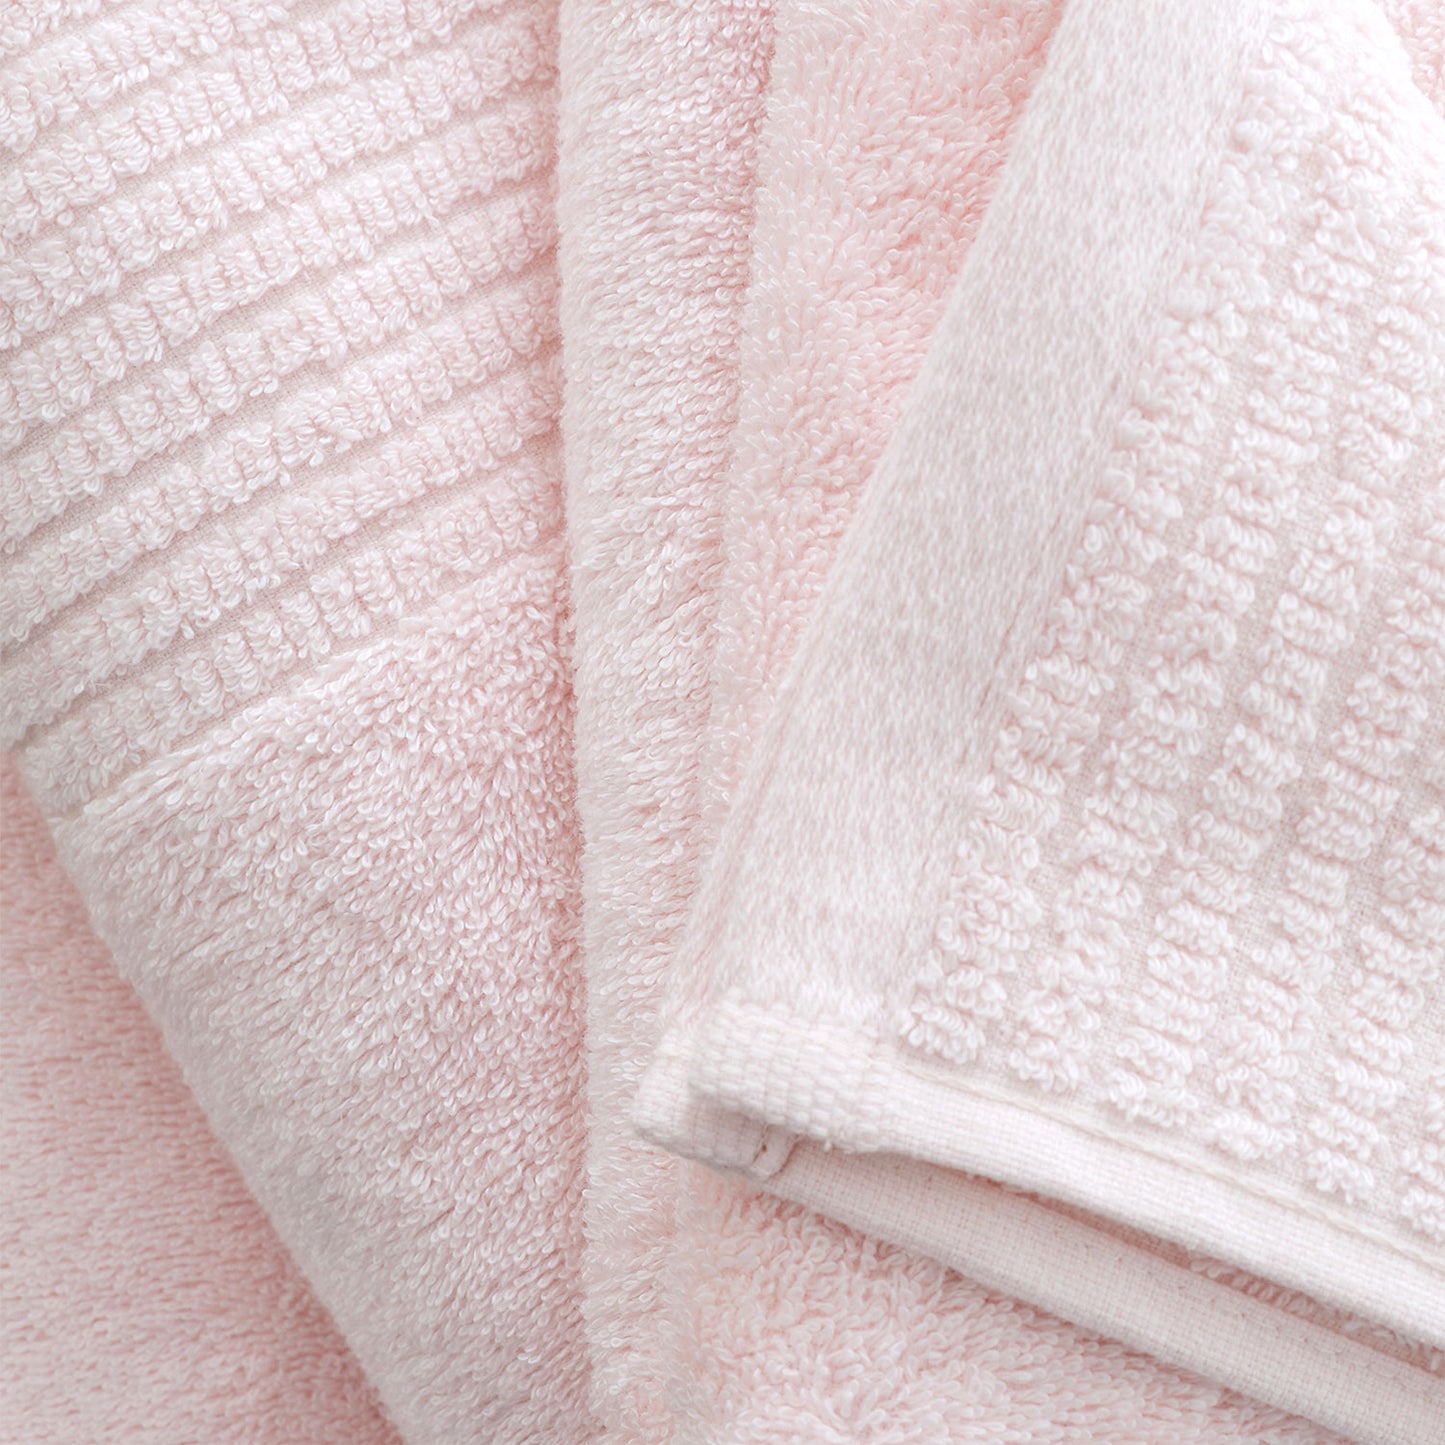 Bianca Pink Egyptian Cotton Towels